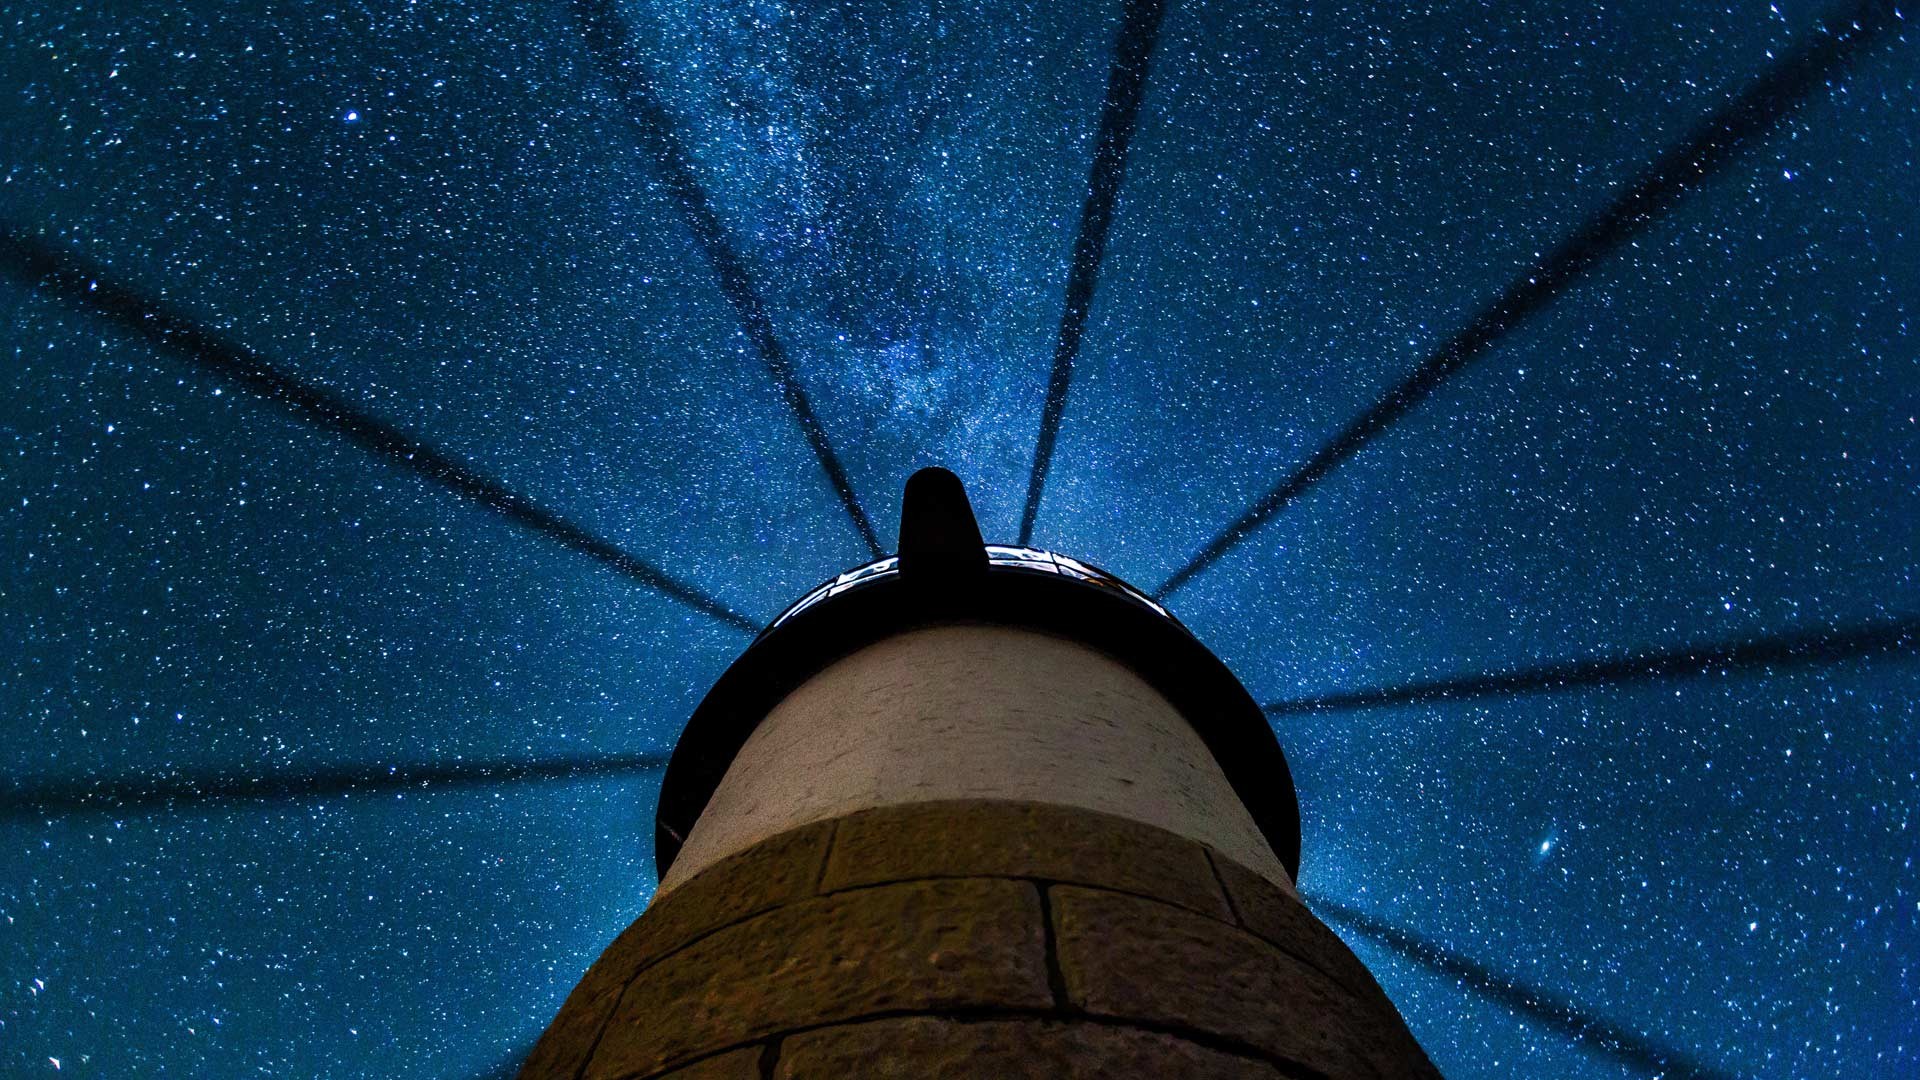 Worms Eye View Clouds Nature Night Sky Stars Milky Way Architecture Maine USA Lights Lighthouse Bott 1920x1080